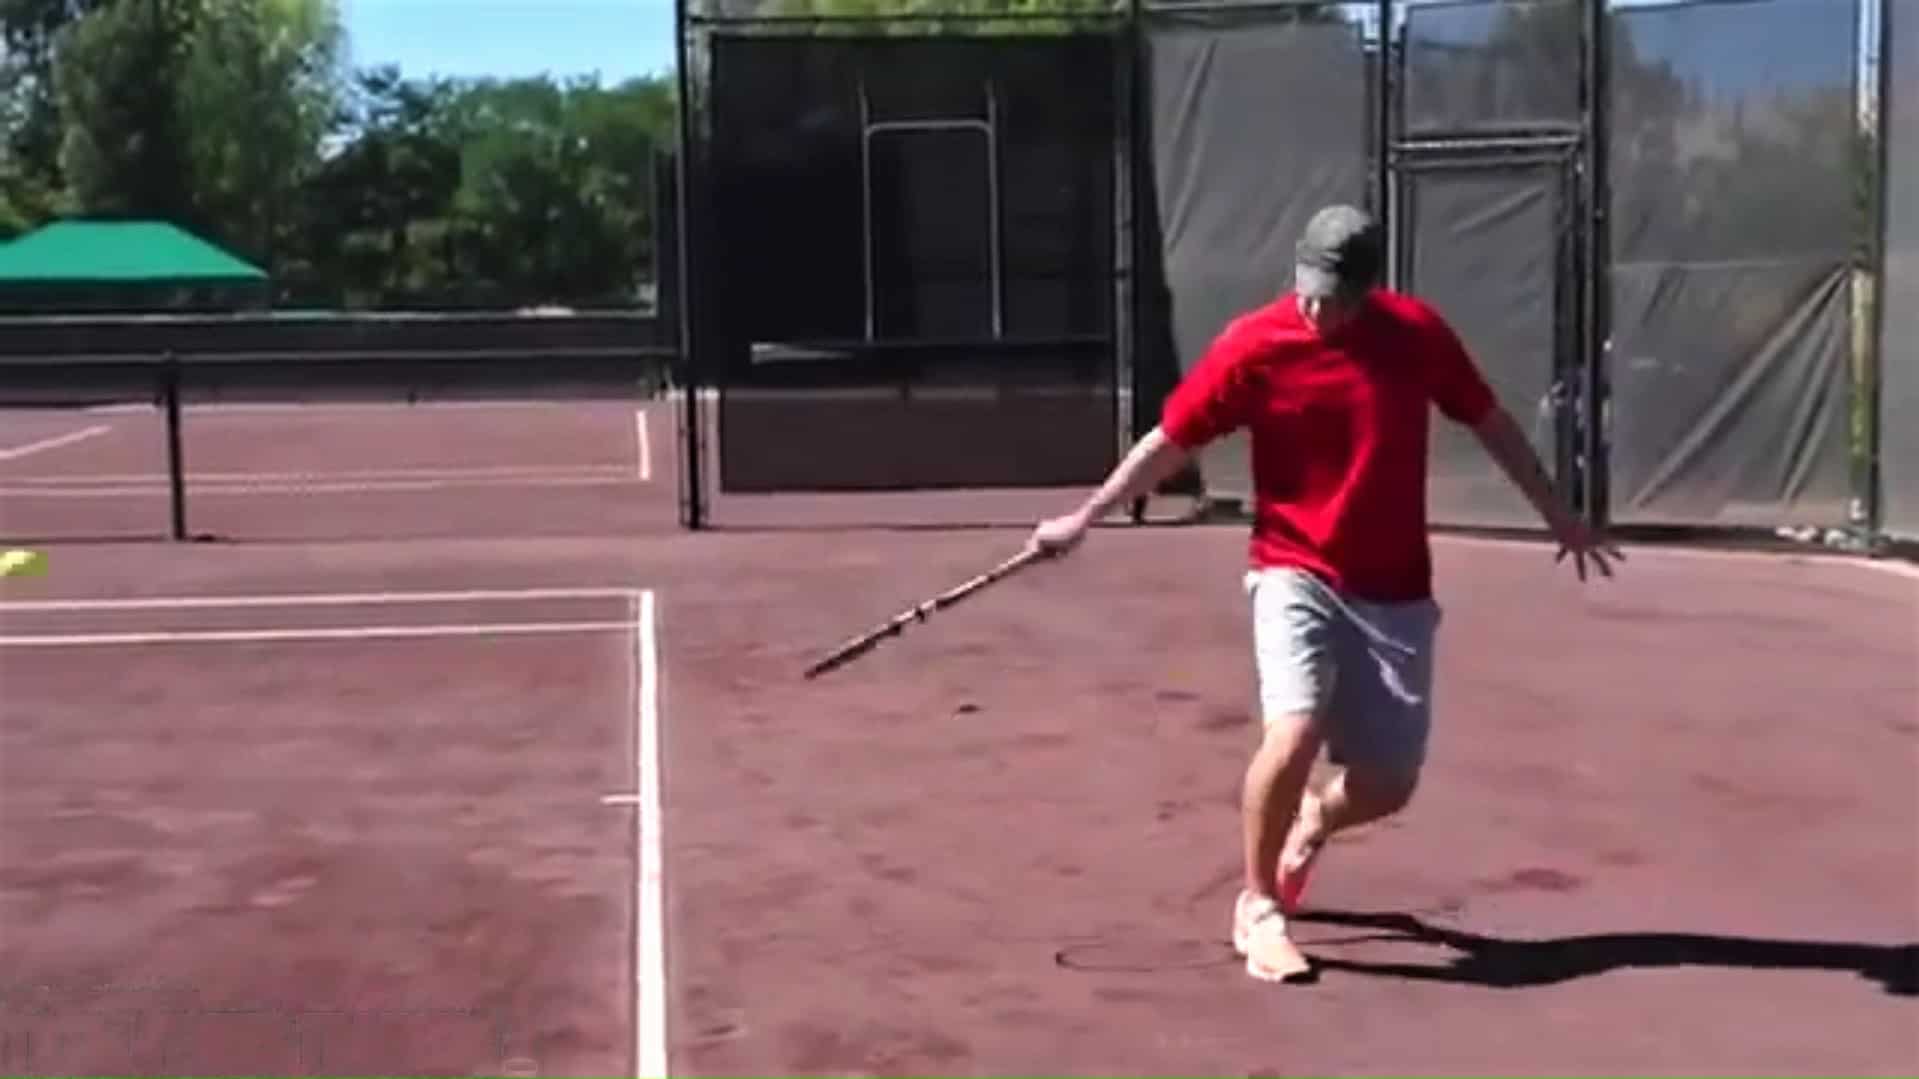 A player practicing a one-handed backhand tennis follow through.